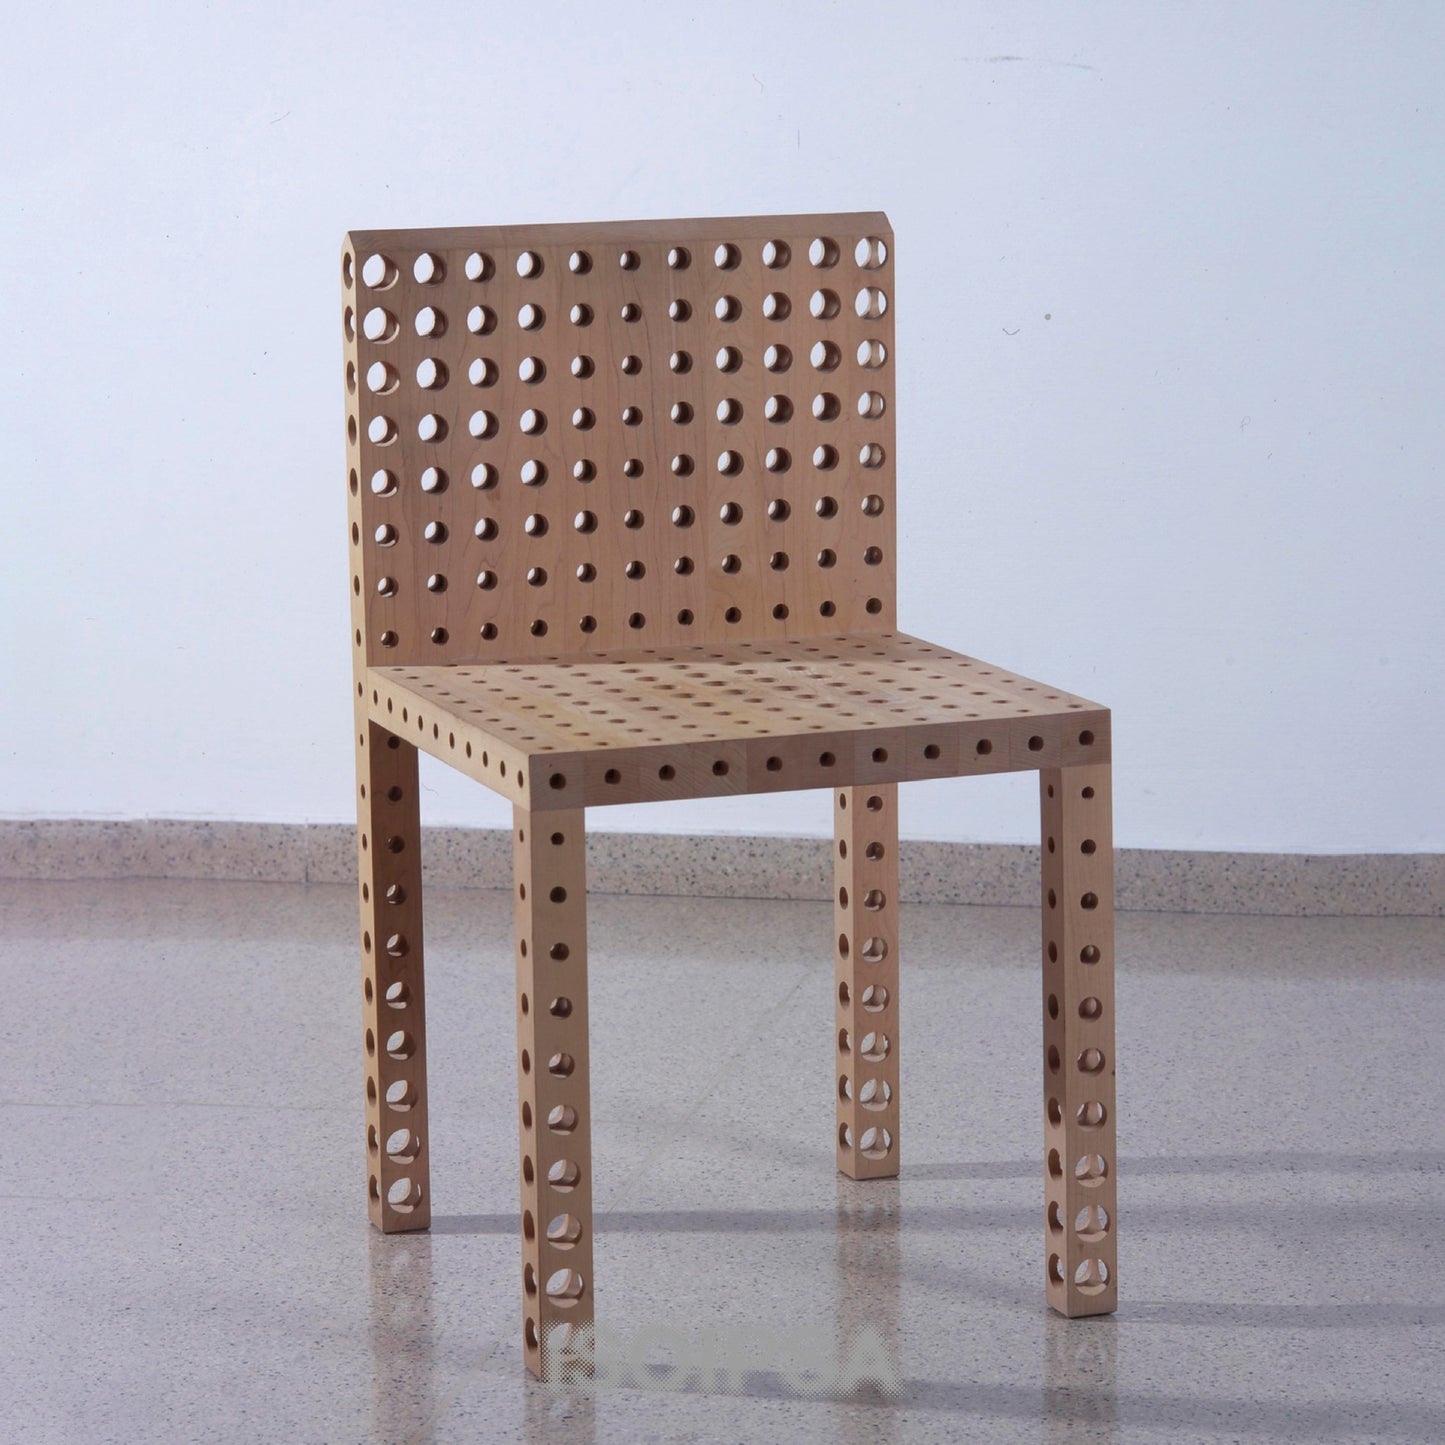 Chair with Holes